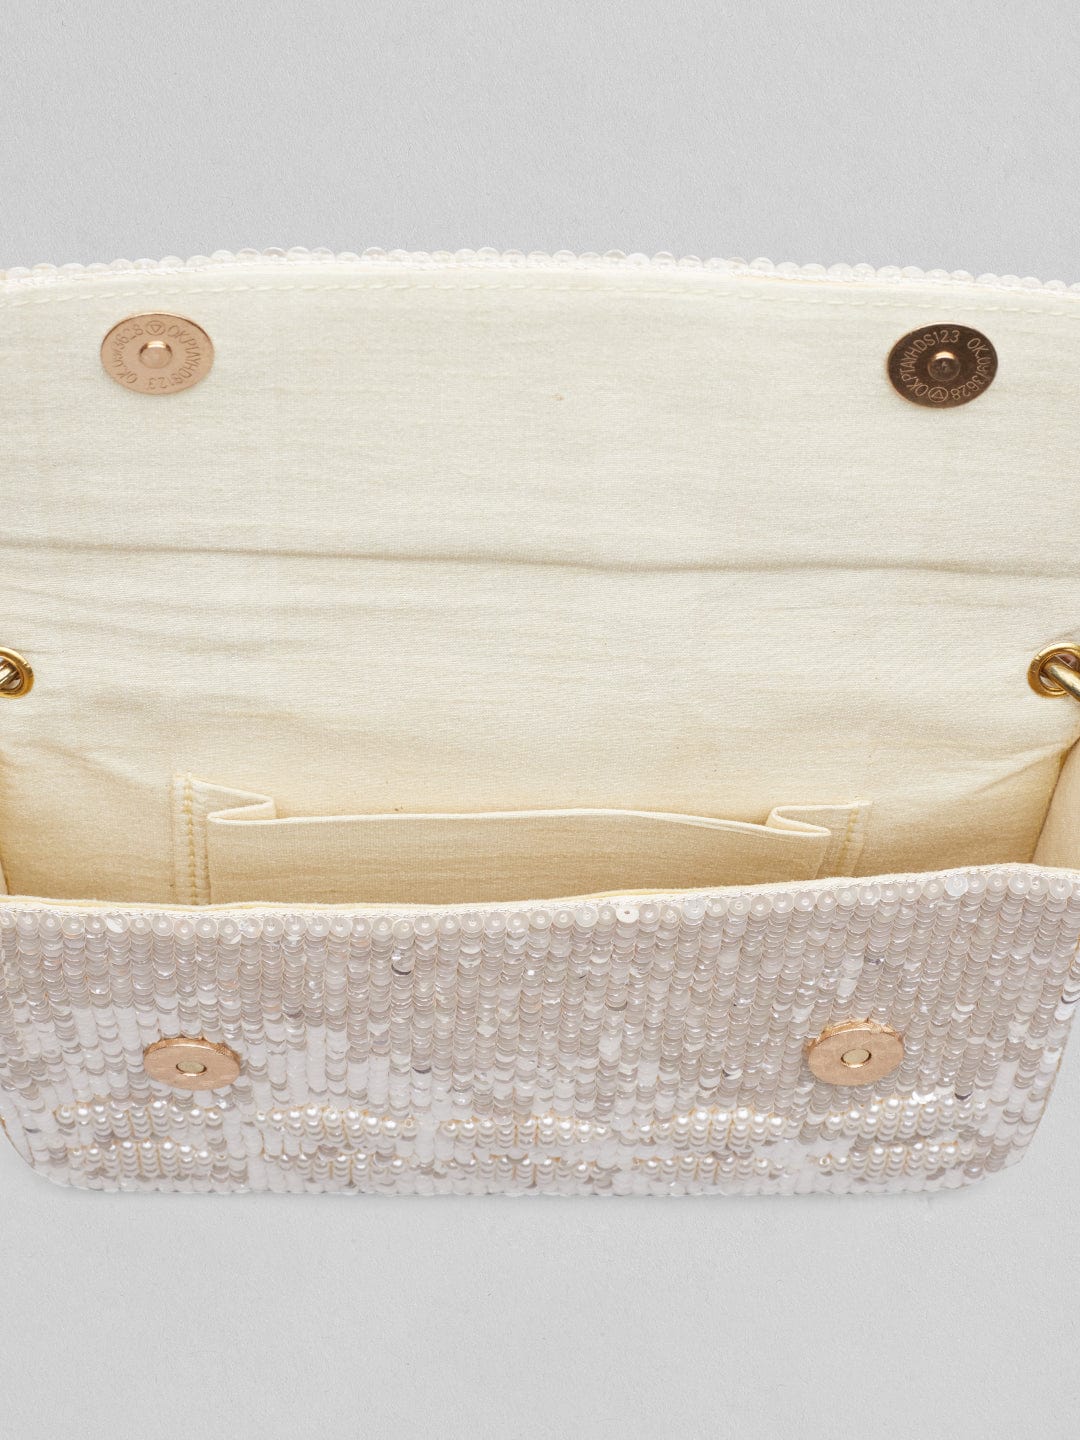 Rubans Cream Colour Handbag With Embroided Design And Pearls Handbag, Wallet Accessories &amp; Clutches